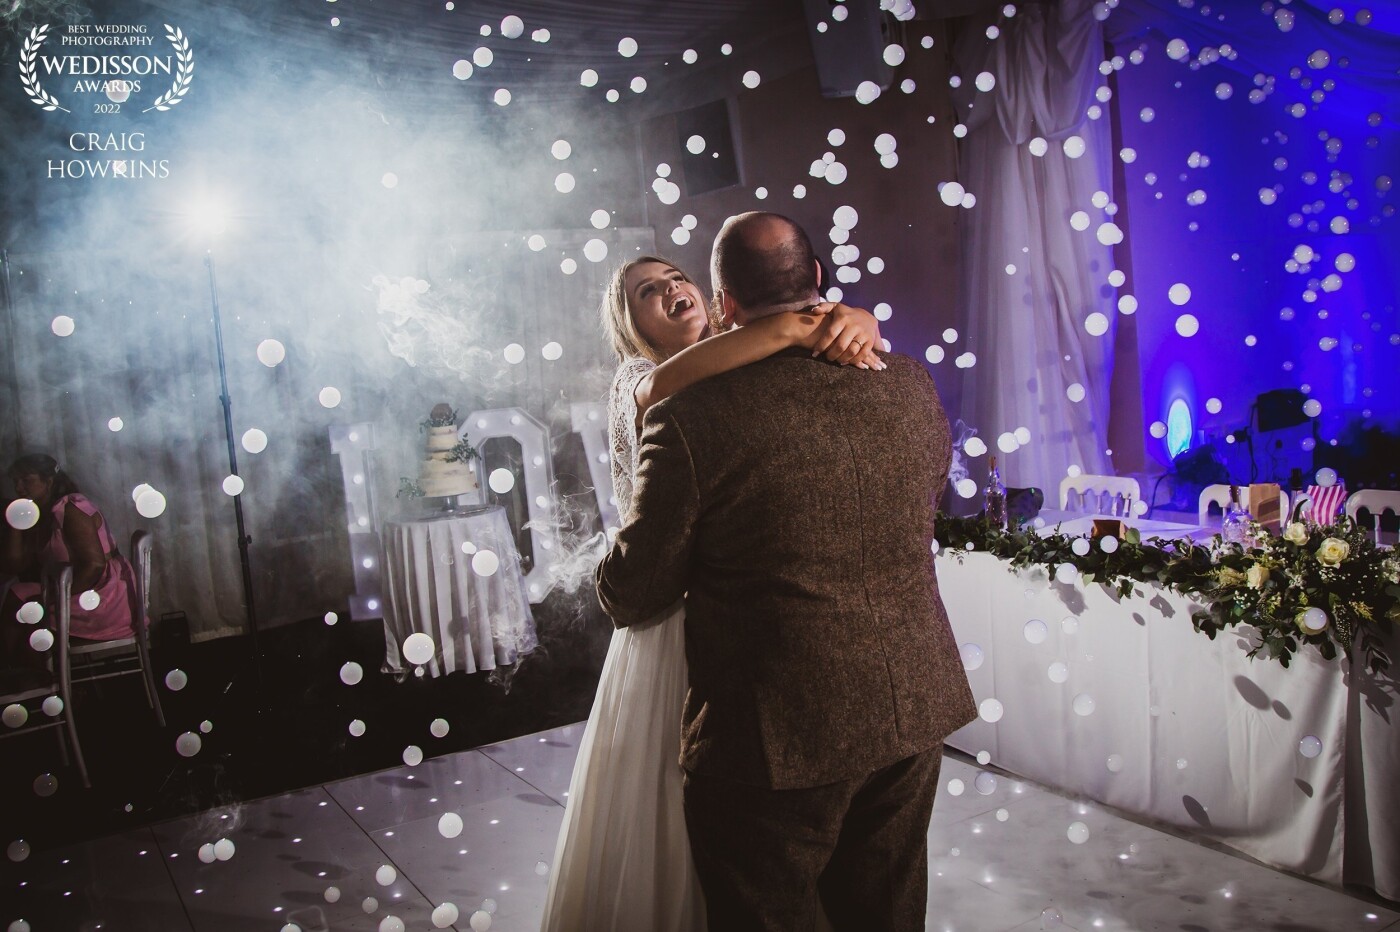 This was a wonderful moment I captured of the first dance. Two people so in love with each other and so in the moment. This is why I love my job!